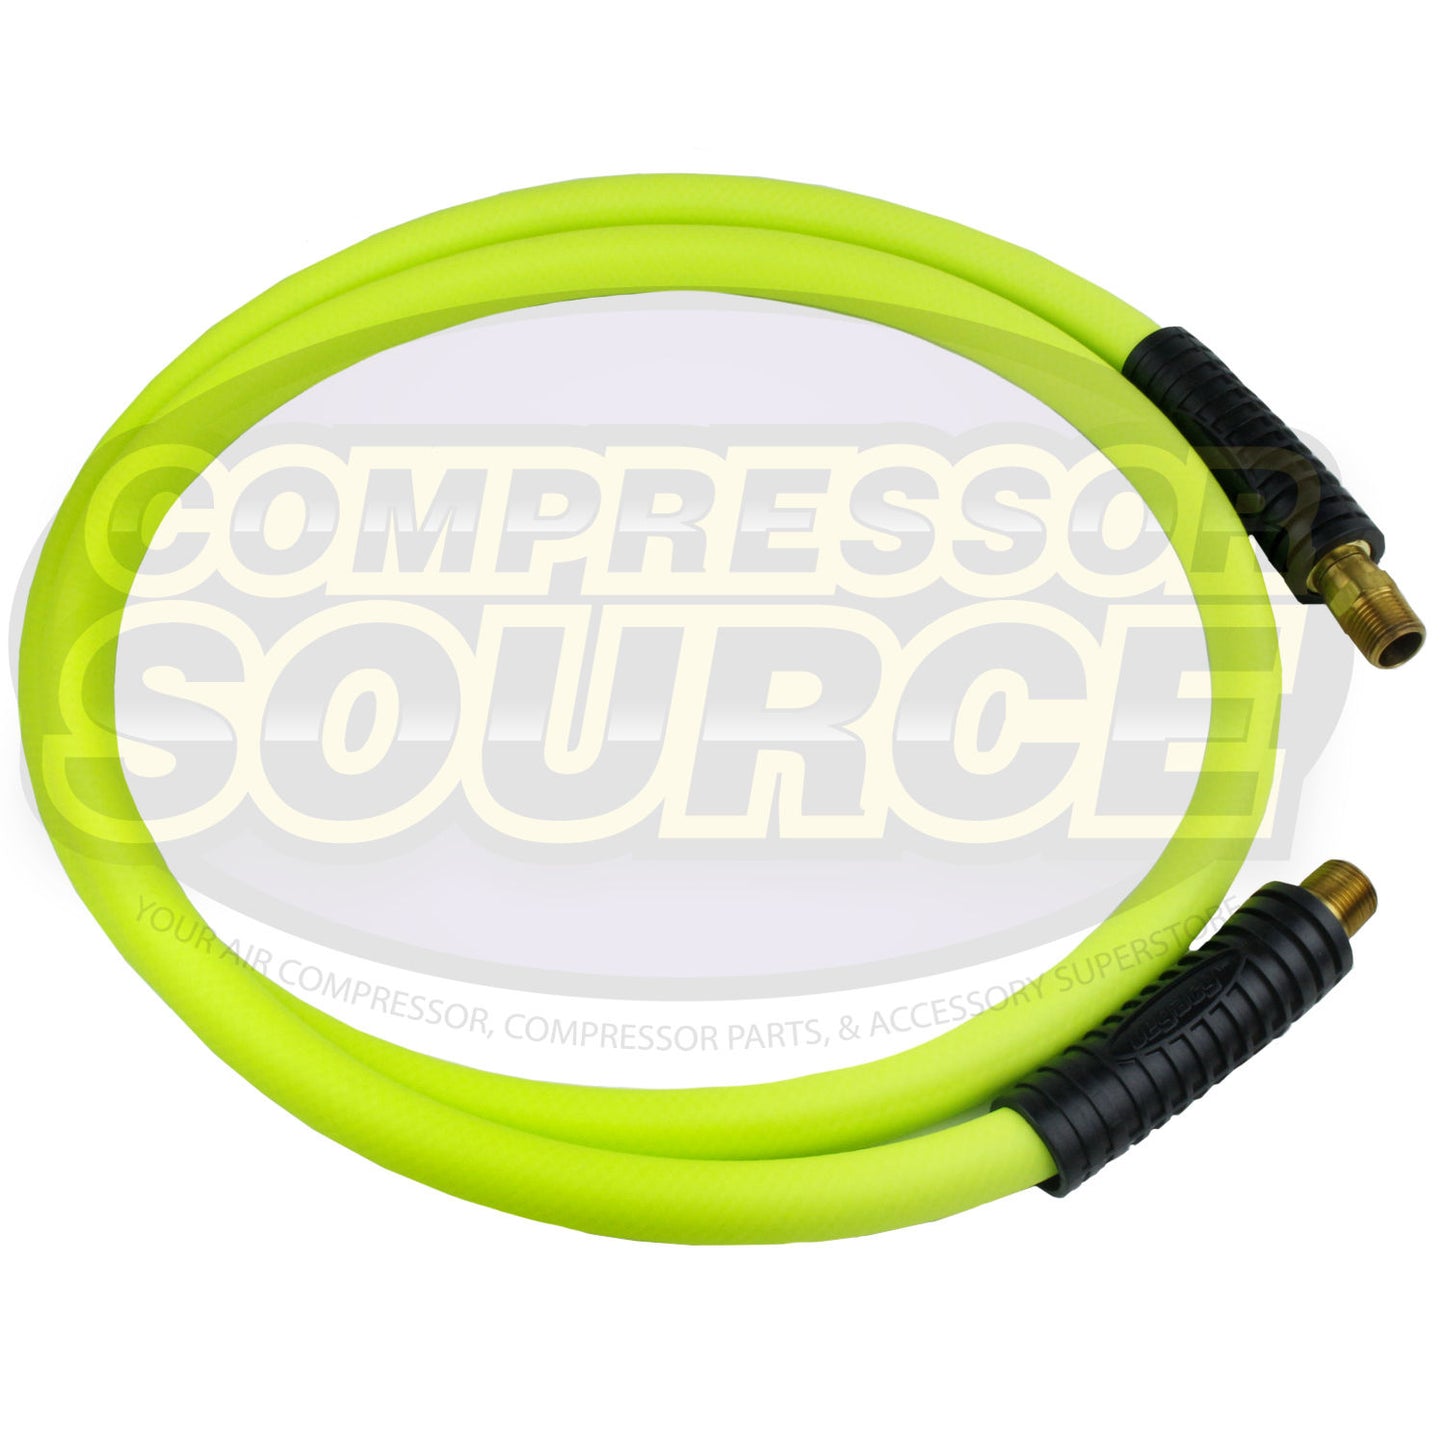 New Flexzilla 1/2 x 6' FT Air Hose Whip With 1/2' MNPT Swivel